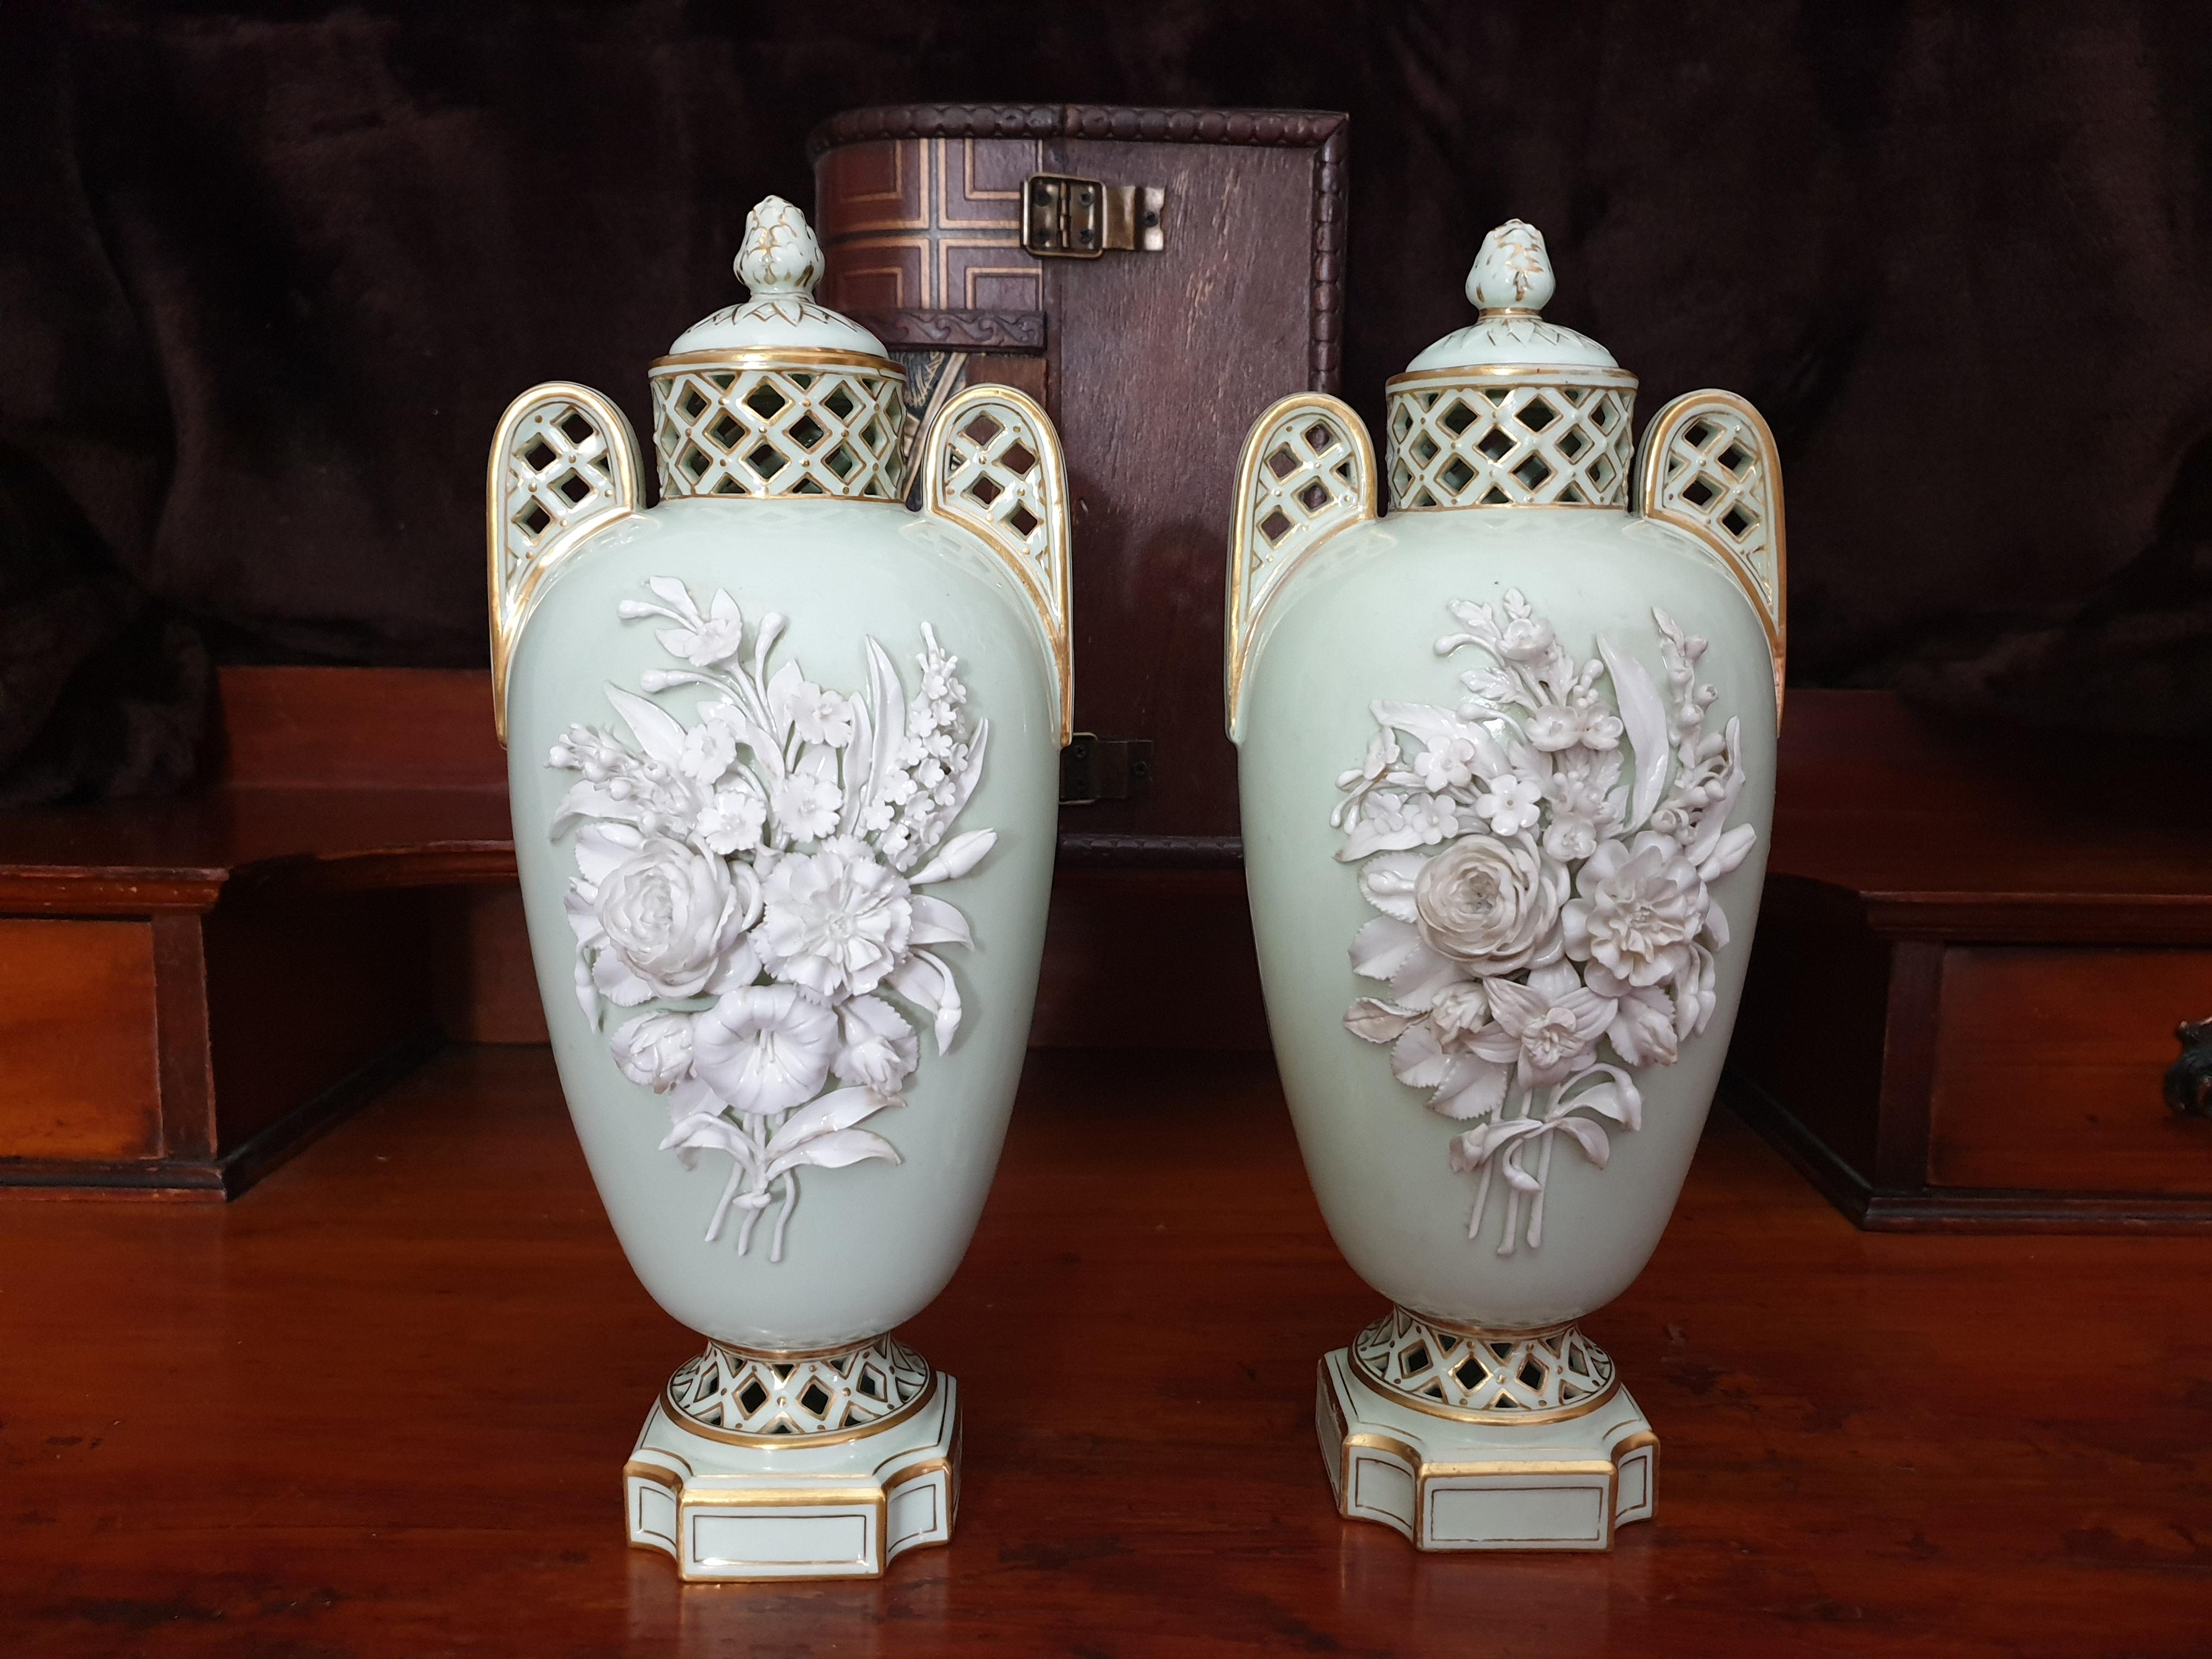 A pair of stunning mint green and floral encrusted lidded vases made by William Brownfield & Co in around circa 1840s in oval form. Two reticulated handles stems from the high pierced neck and highlighted in gilt. The lids are decorated with a leaf